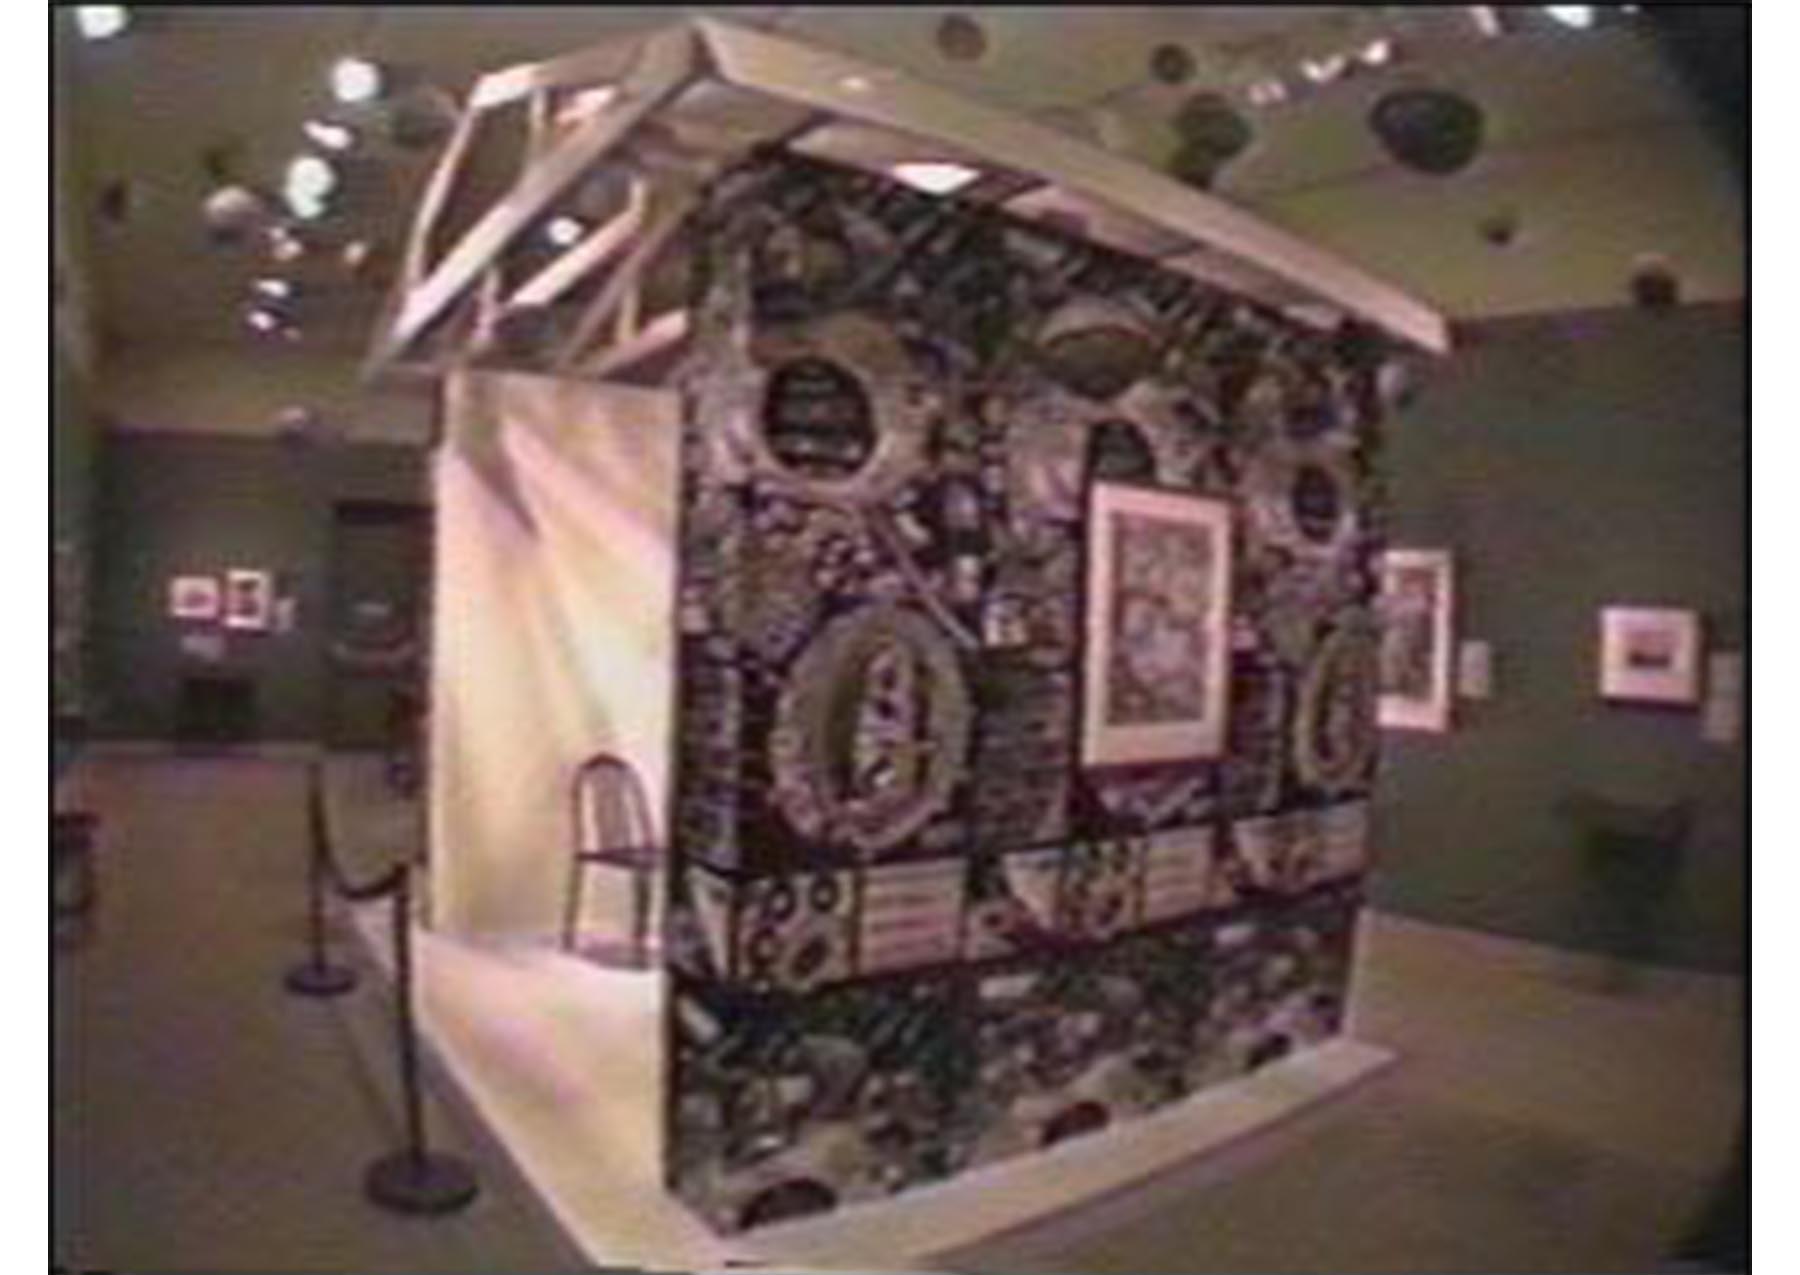 installation in an art gallery. house-shaped structure with black and white large print draping along its edges